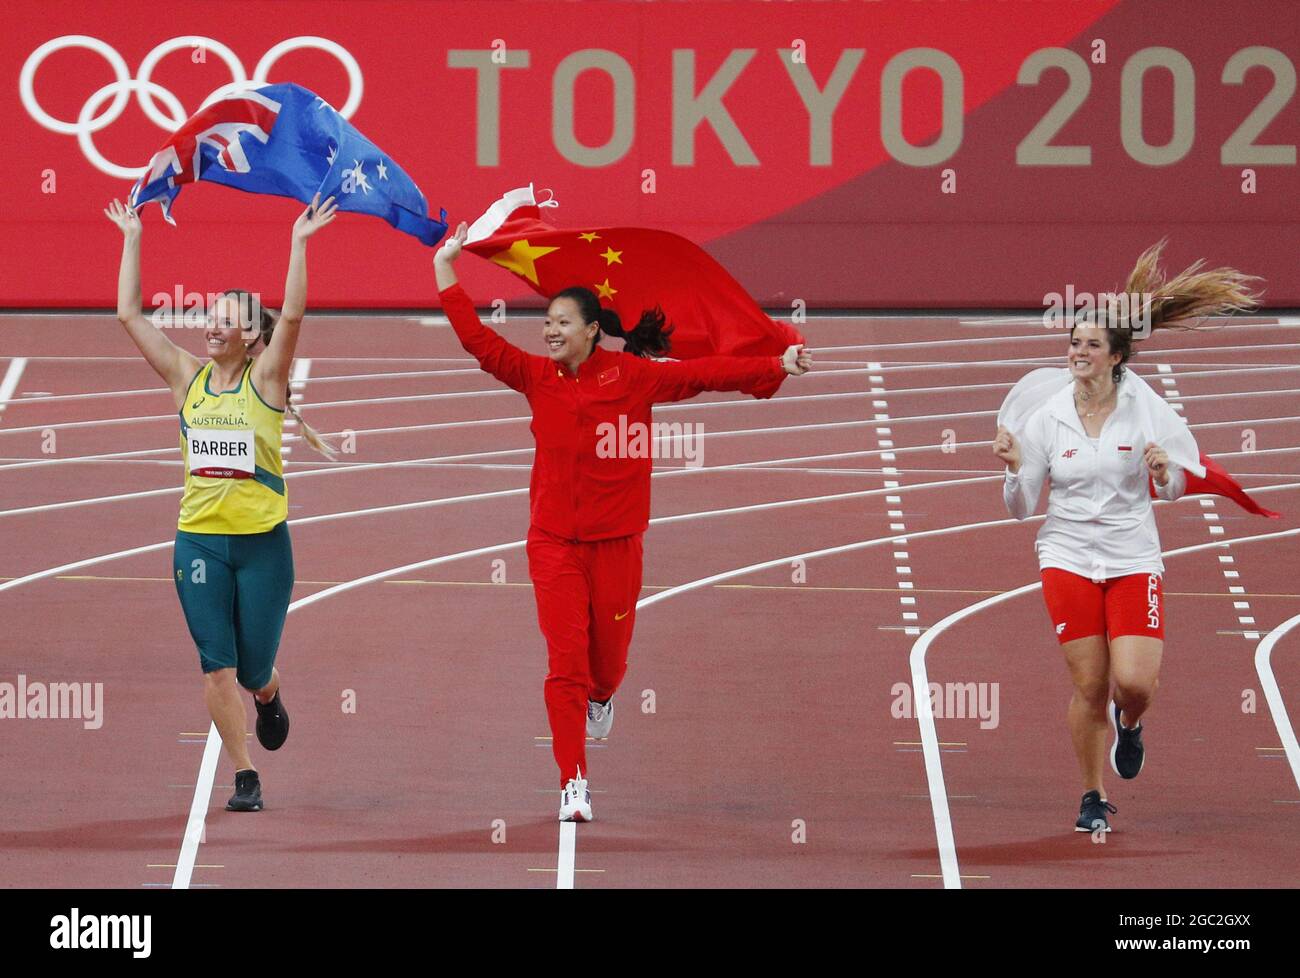 Tokyo, Japan. 06th Aug, 2021. Liu Shiying of China, Maria Andrejczyk of Poland and Kelsey-Lee Barber of Australia celebrate after winning the gold, silver and Bronze medals in the Women's Javelin Throw at the Tokyo 2020 Summer Olympic Games in Tokyo, Japan on Friday, August 6, 2021. Photo by Bob Strong/UPI Credit: UPI/Alamy Live News Stock Photo